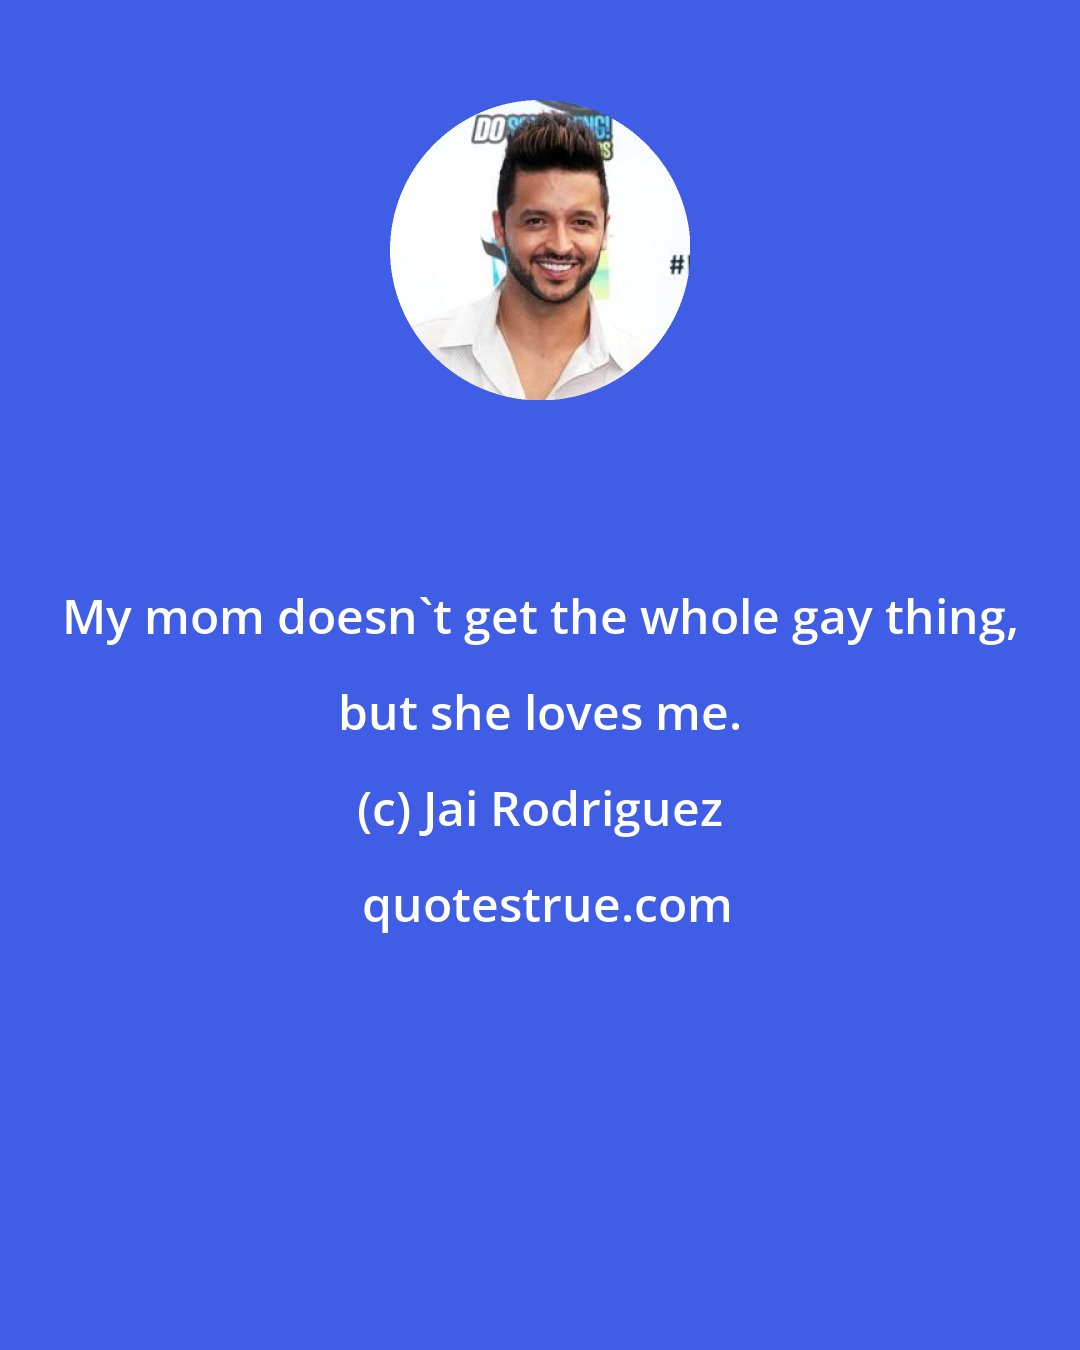 Jai Rodriguez: My mom doesn't get the whole gay thing, but she loves me.